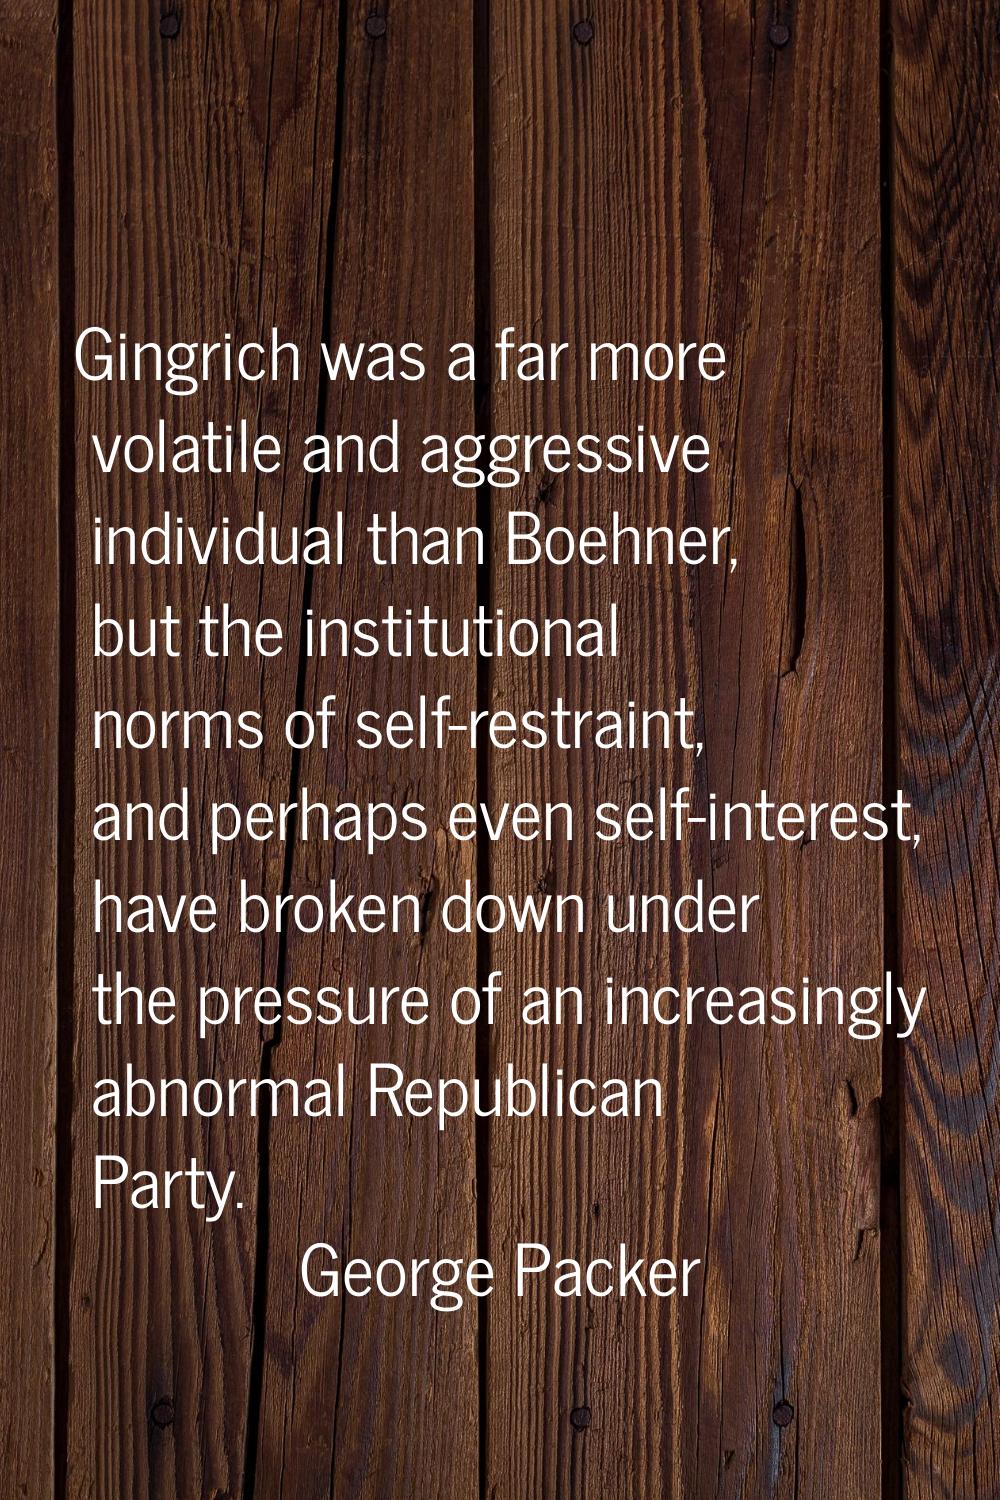 Gingrich was a far more volatile and aggressive individual than Boehner, but the institutional norm